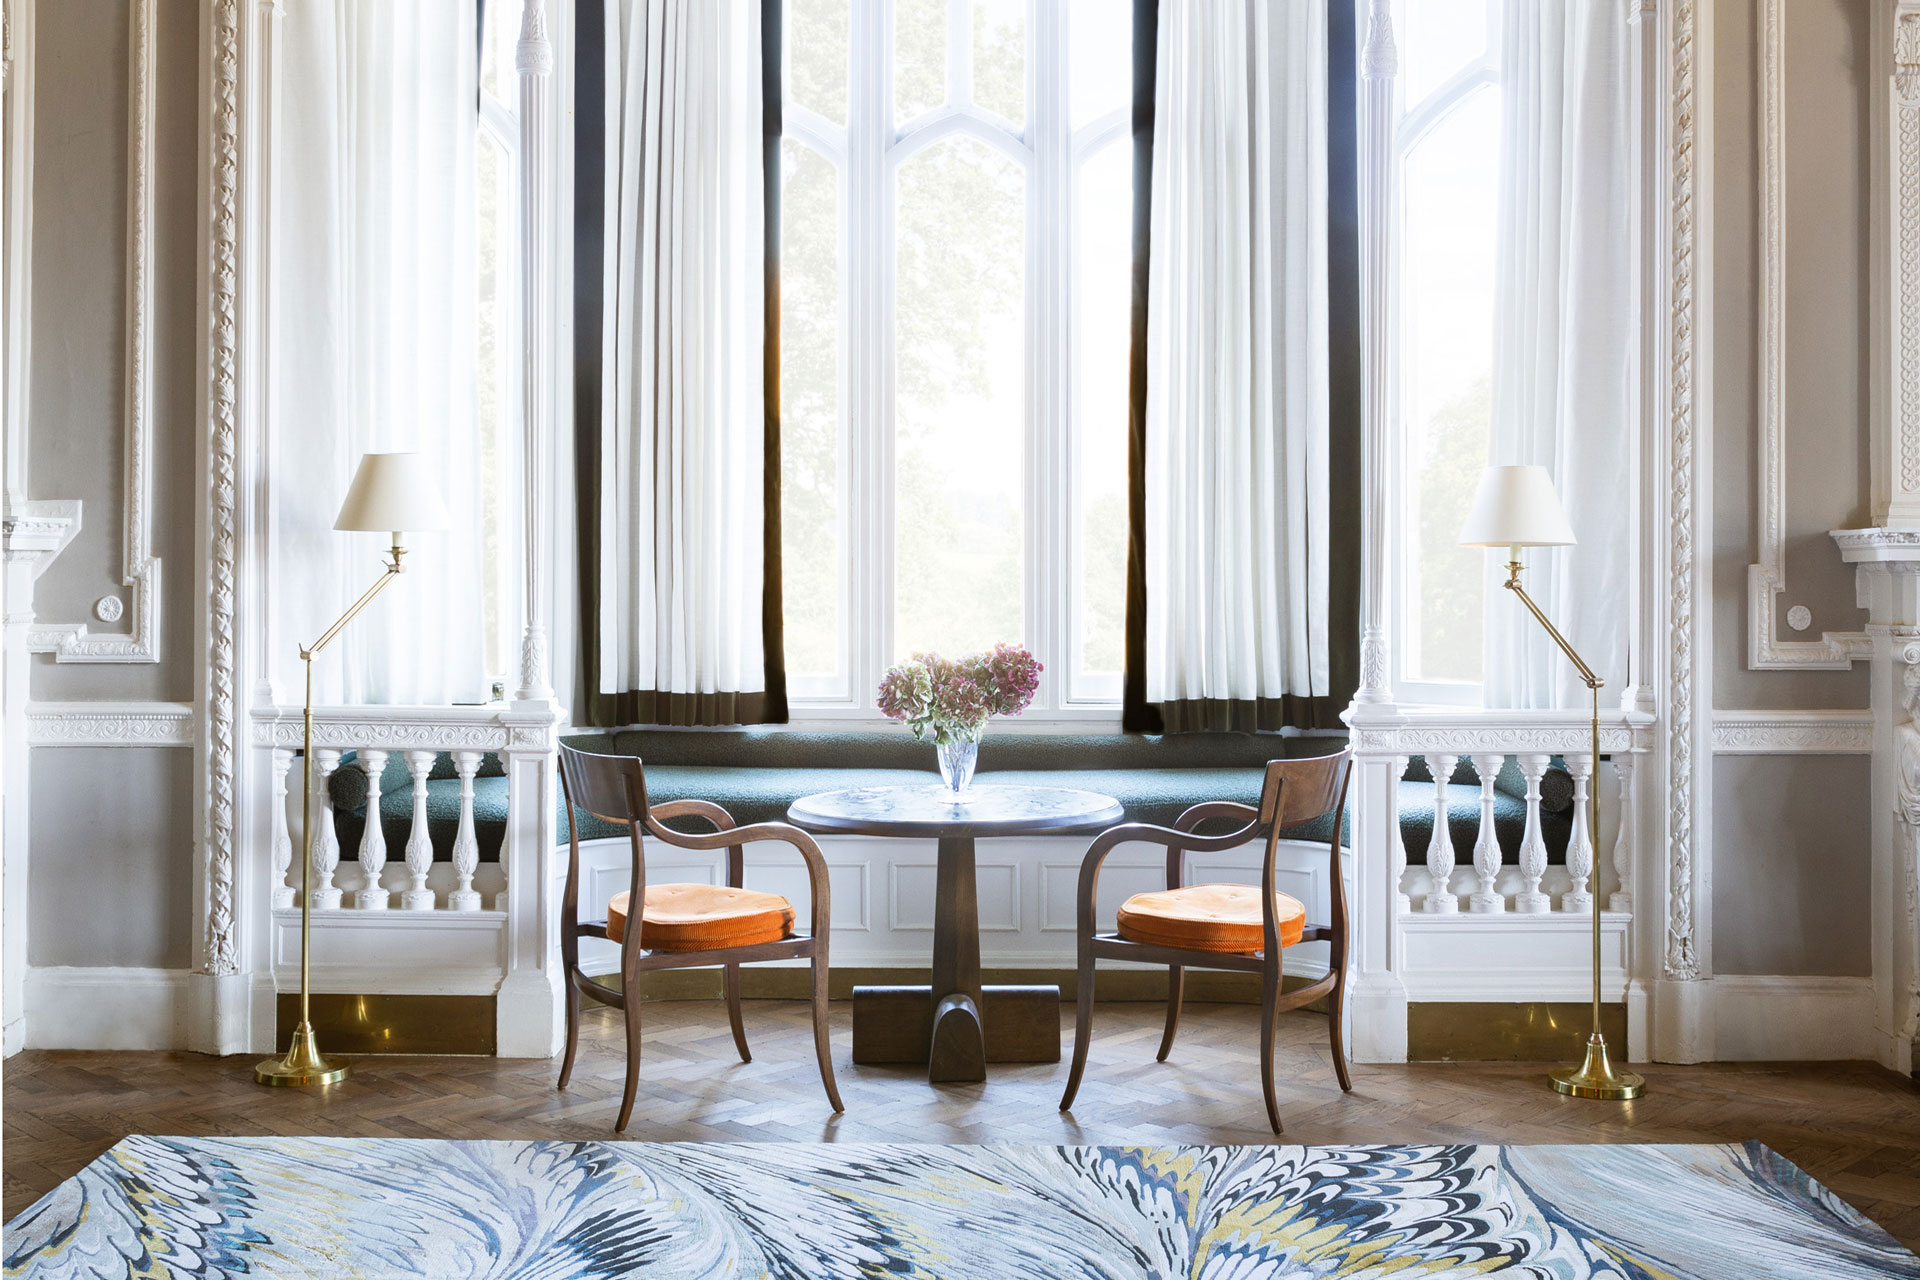 A view of a grand window featuring a marbled rug from The Rug Company with two chairs in orange cushions